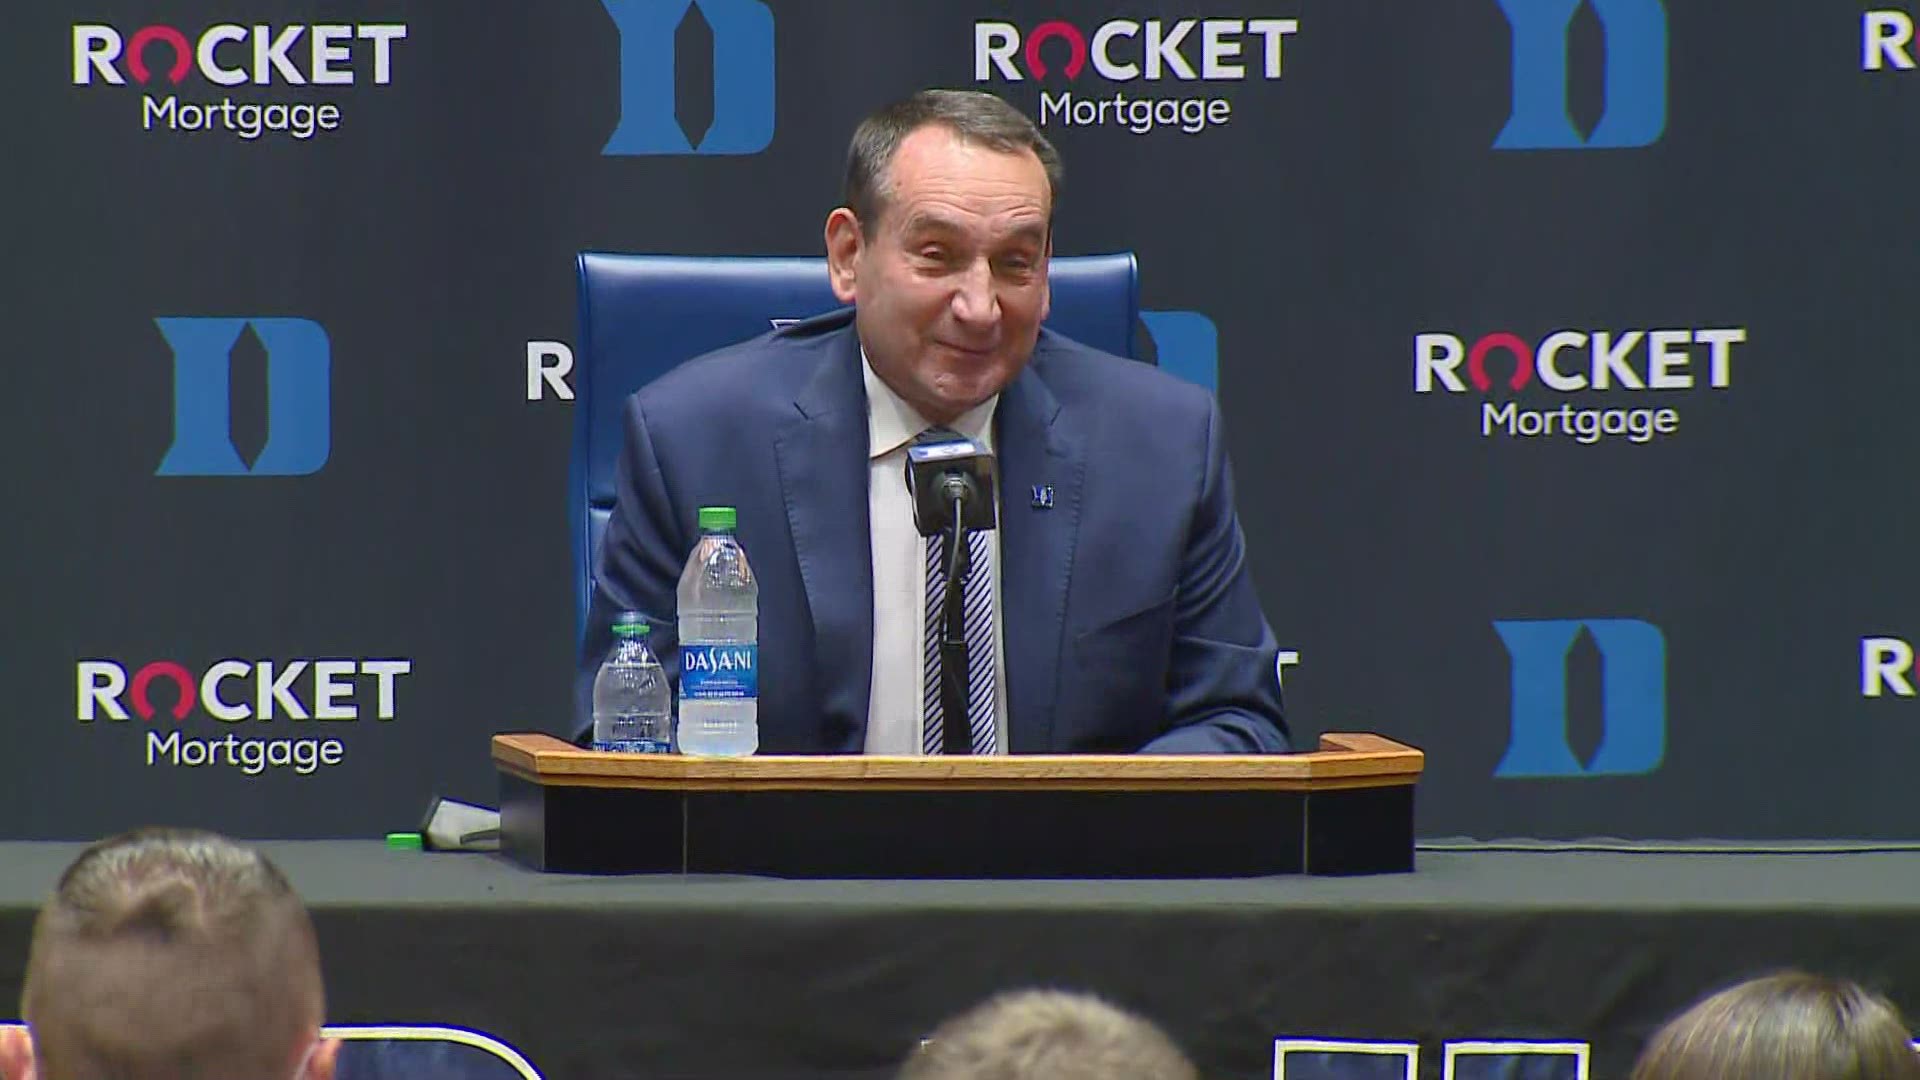 Duke head coach Mike Krzyzewski shared his reason for retiring and reflected on his career on Thursday. He's ready to give his final season all he's got.